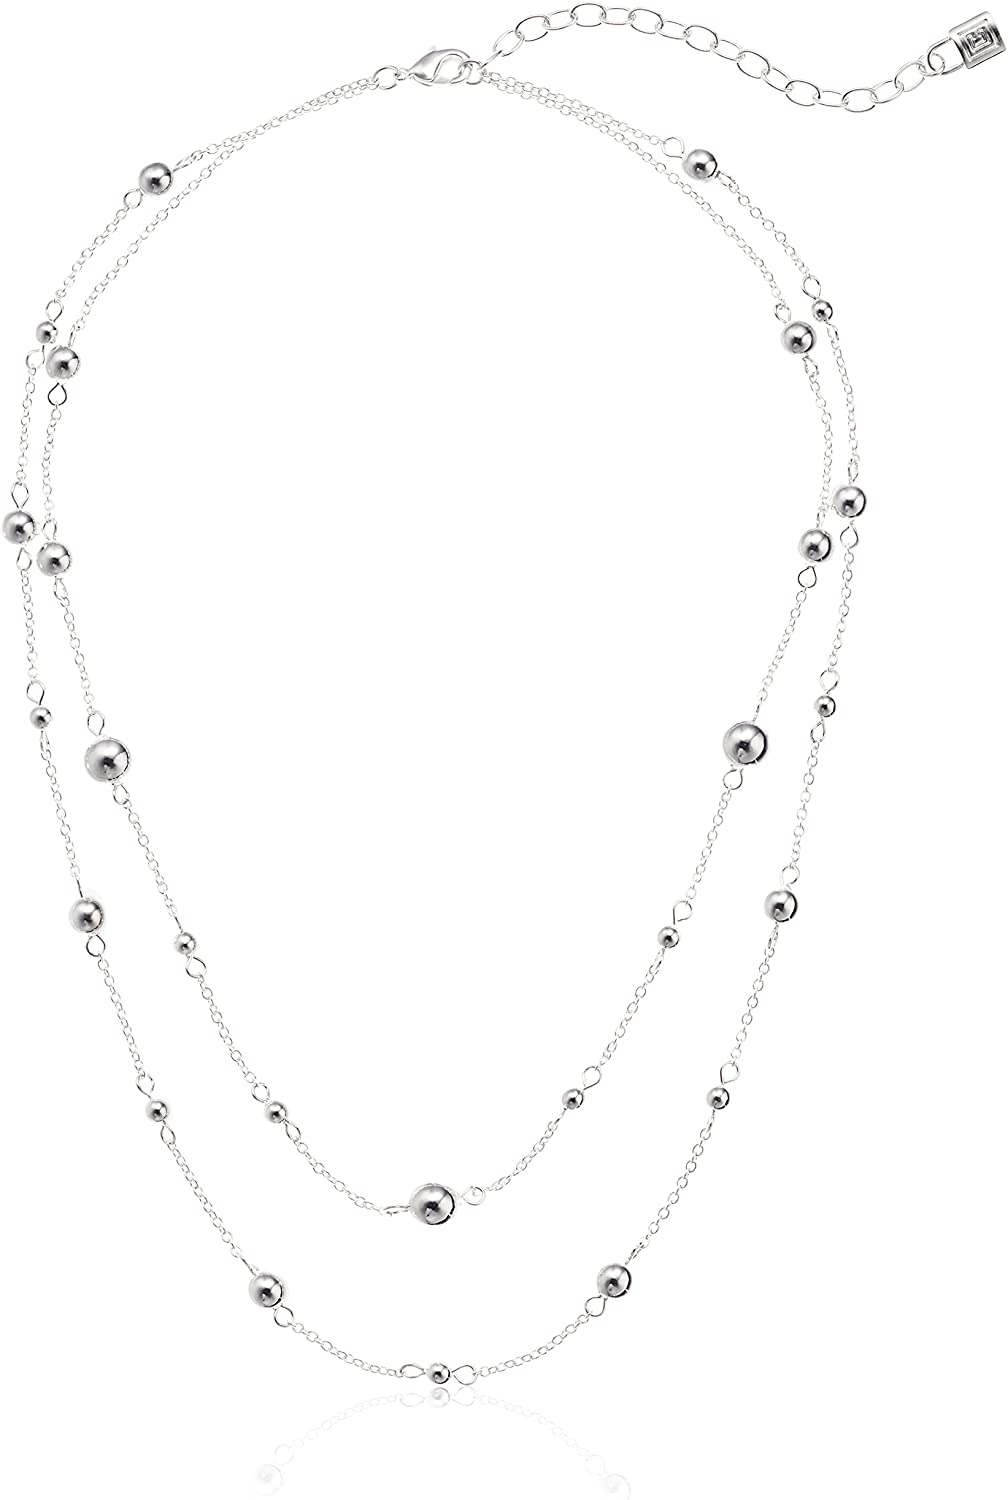 Chaps Women's Double Strand Bead Strand Necklace, Silver